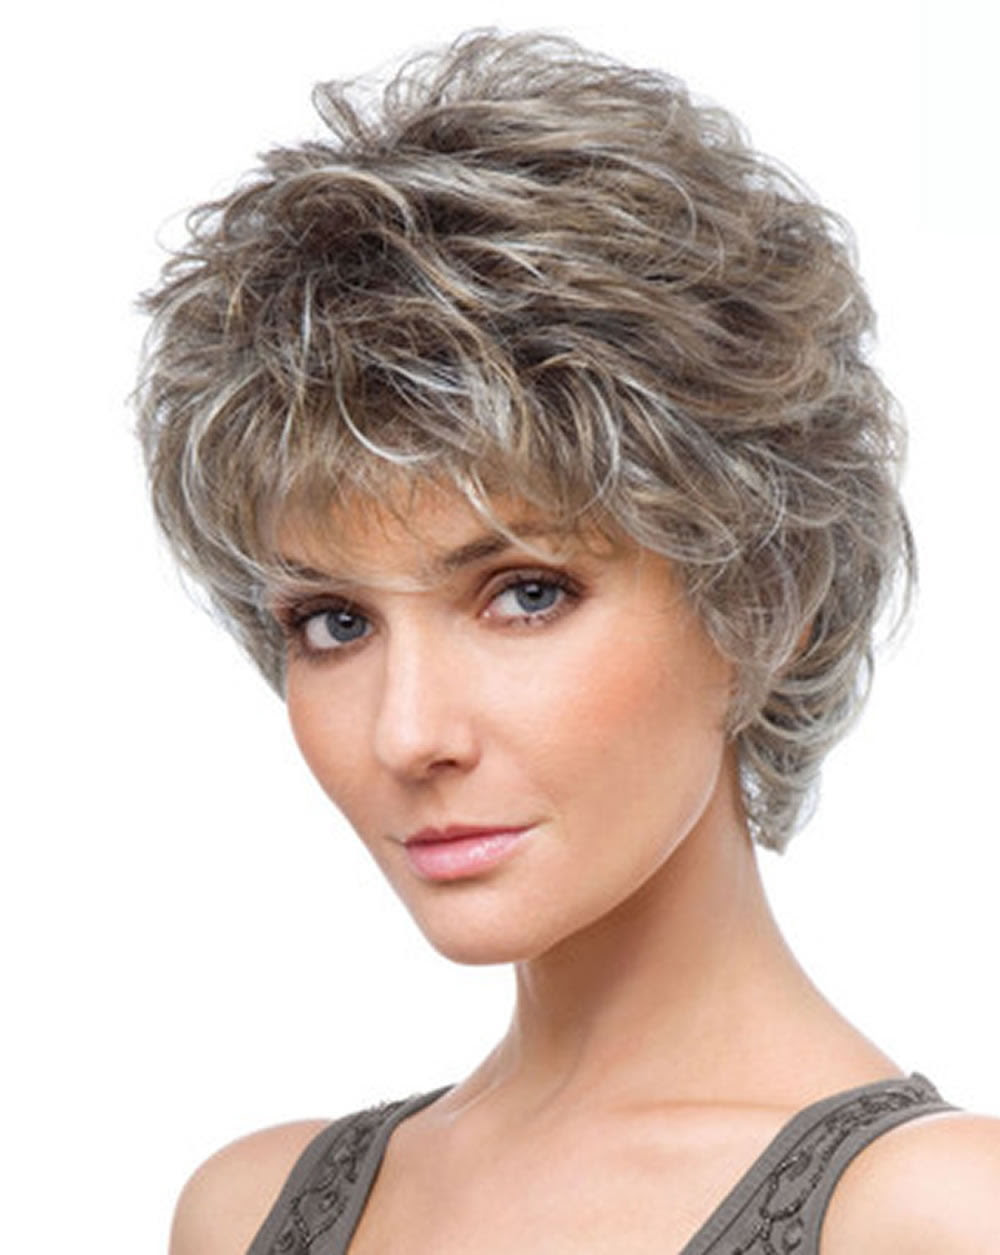 Sexy Short Hairstyles For Women Haircuts For Men 50 Hot